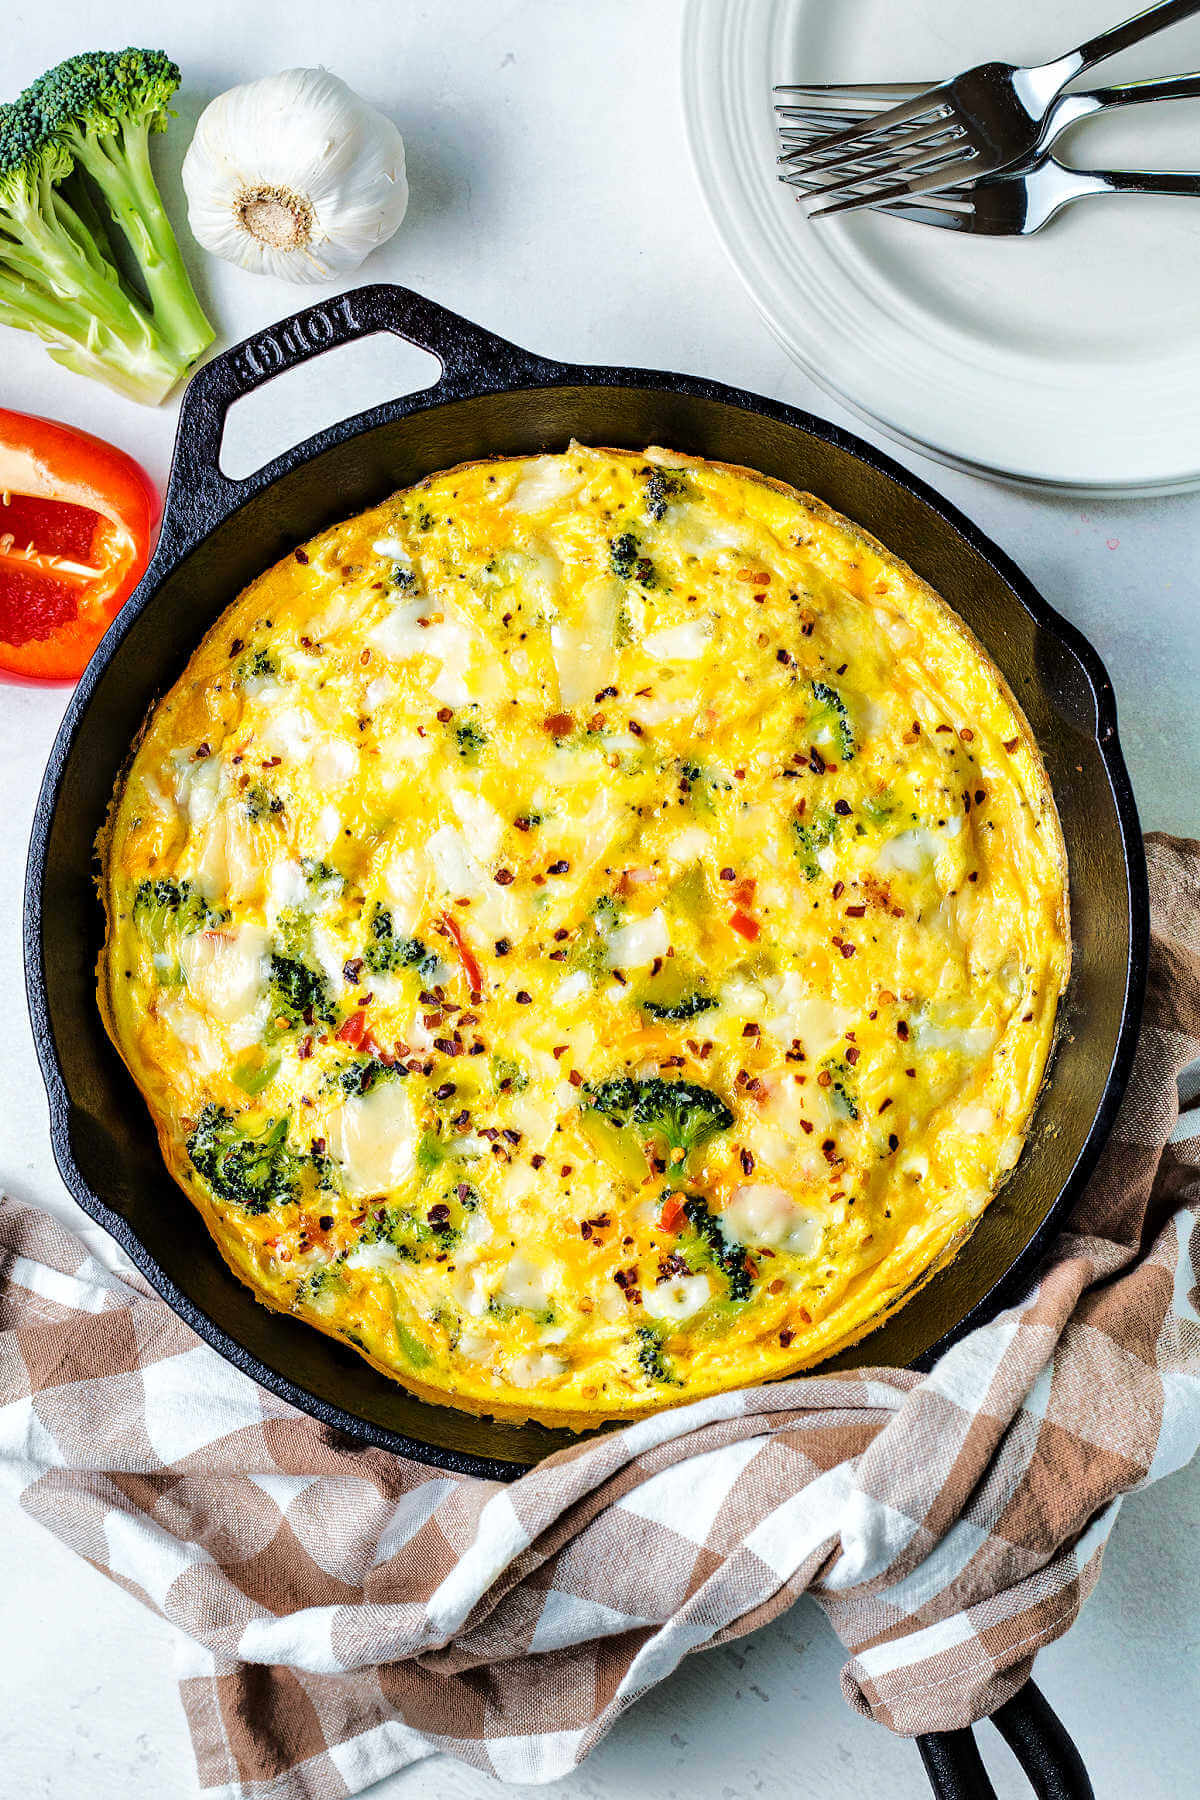 baked vegetable frittata on a table with plates and forks.